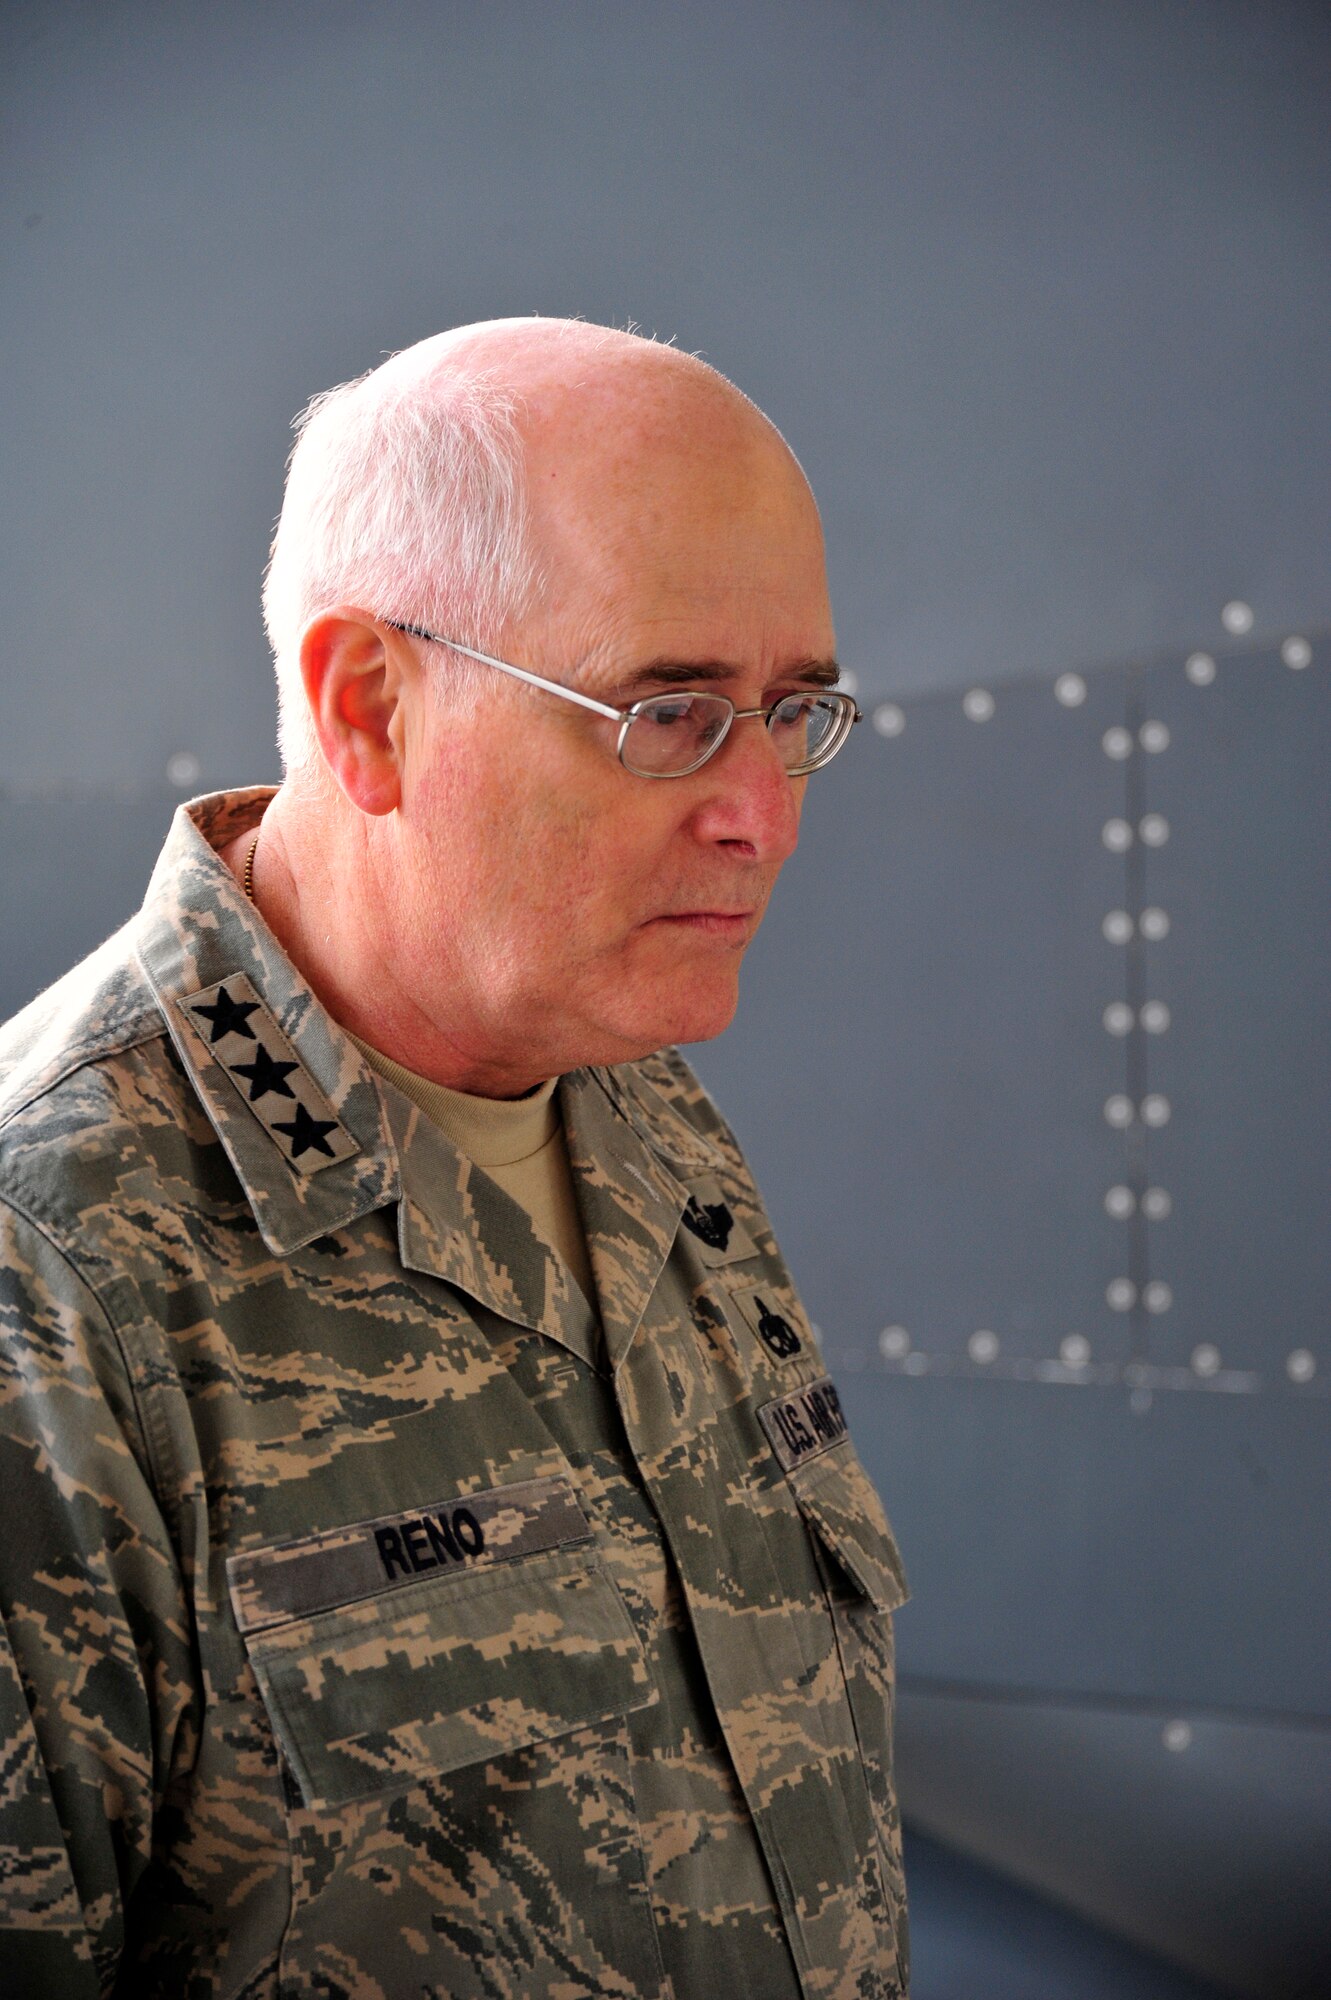 SOUTHWEST ASIA - Lt. Gen. Loren Reno, Deputy Chief of Staff for Logistics, Installations and Mission Support, reads a storyboard during a briefing from the 380th Air Expeditionary Wing, regarding upcoming base projects Dec. 10, 2009. General Reno visited each of the aircraft maintenance squadrons before holding an Airman's call to answer questions. (U.S. Air Force photo/Tech. Sgt. Charles Larkin Sr)